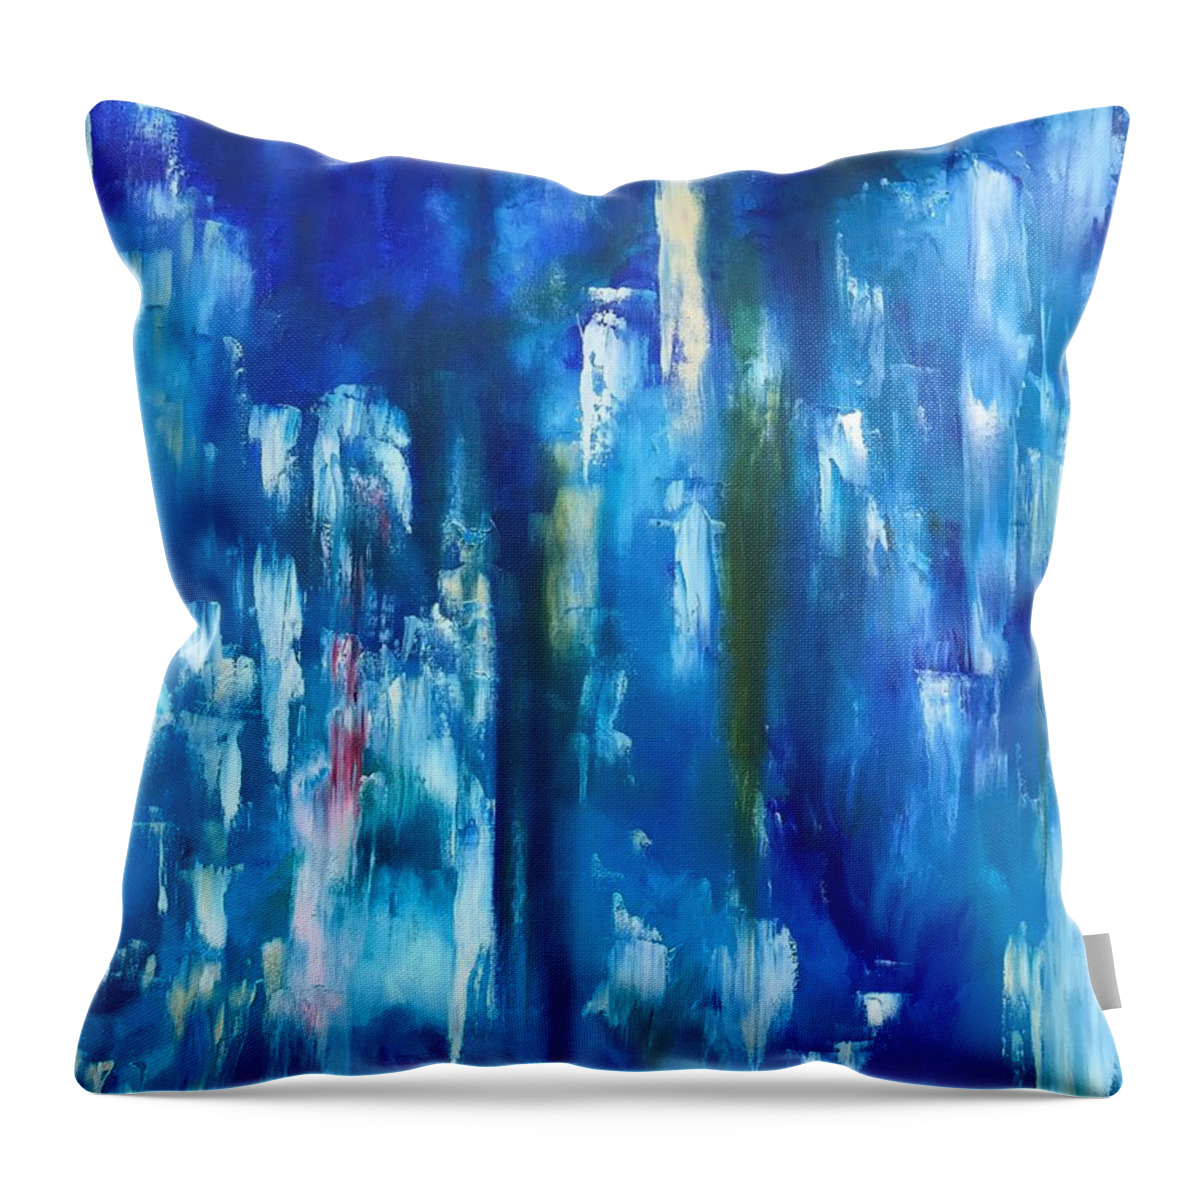 Abstract Art Throw Pillow featuring the painting Blue Grotto - 24 X 30 Oil on Canvas by Hyacinth Paul by Hyacinth Paul